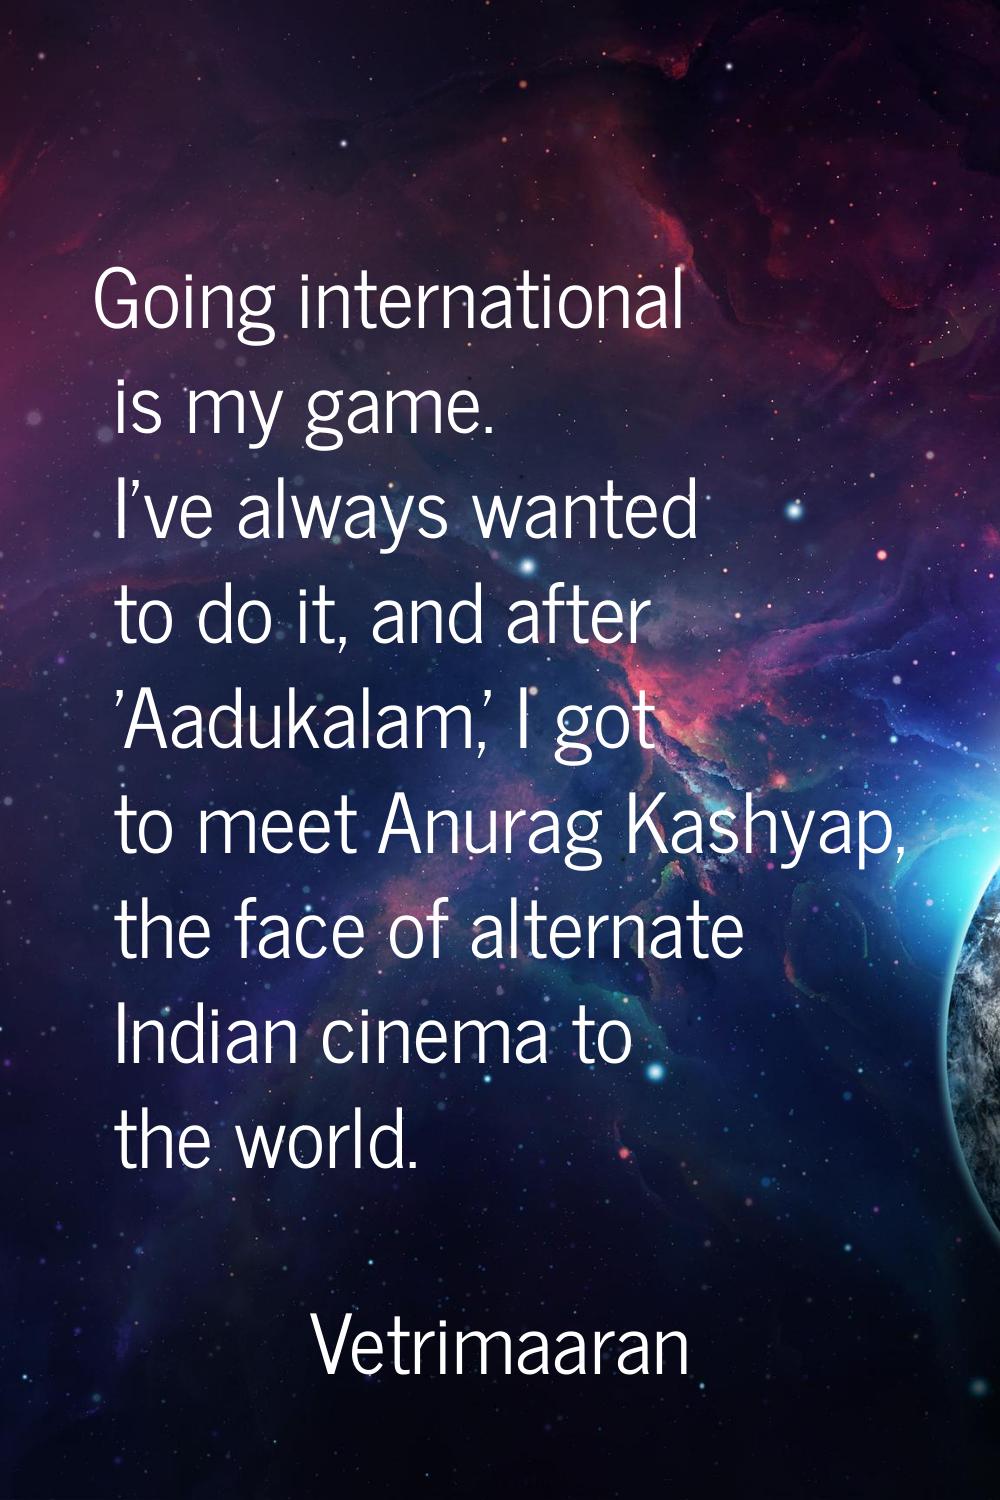 Going international is my game. I've always wanted to do it, and after 'Aadukalam,' I got to meet A